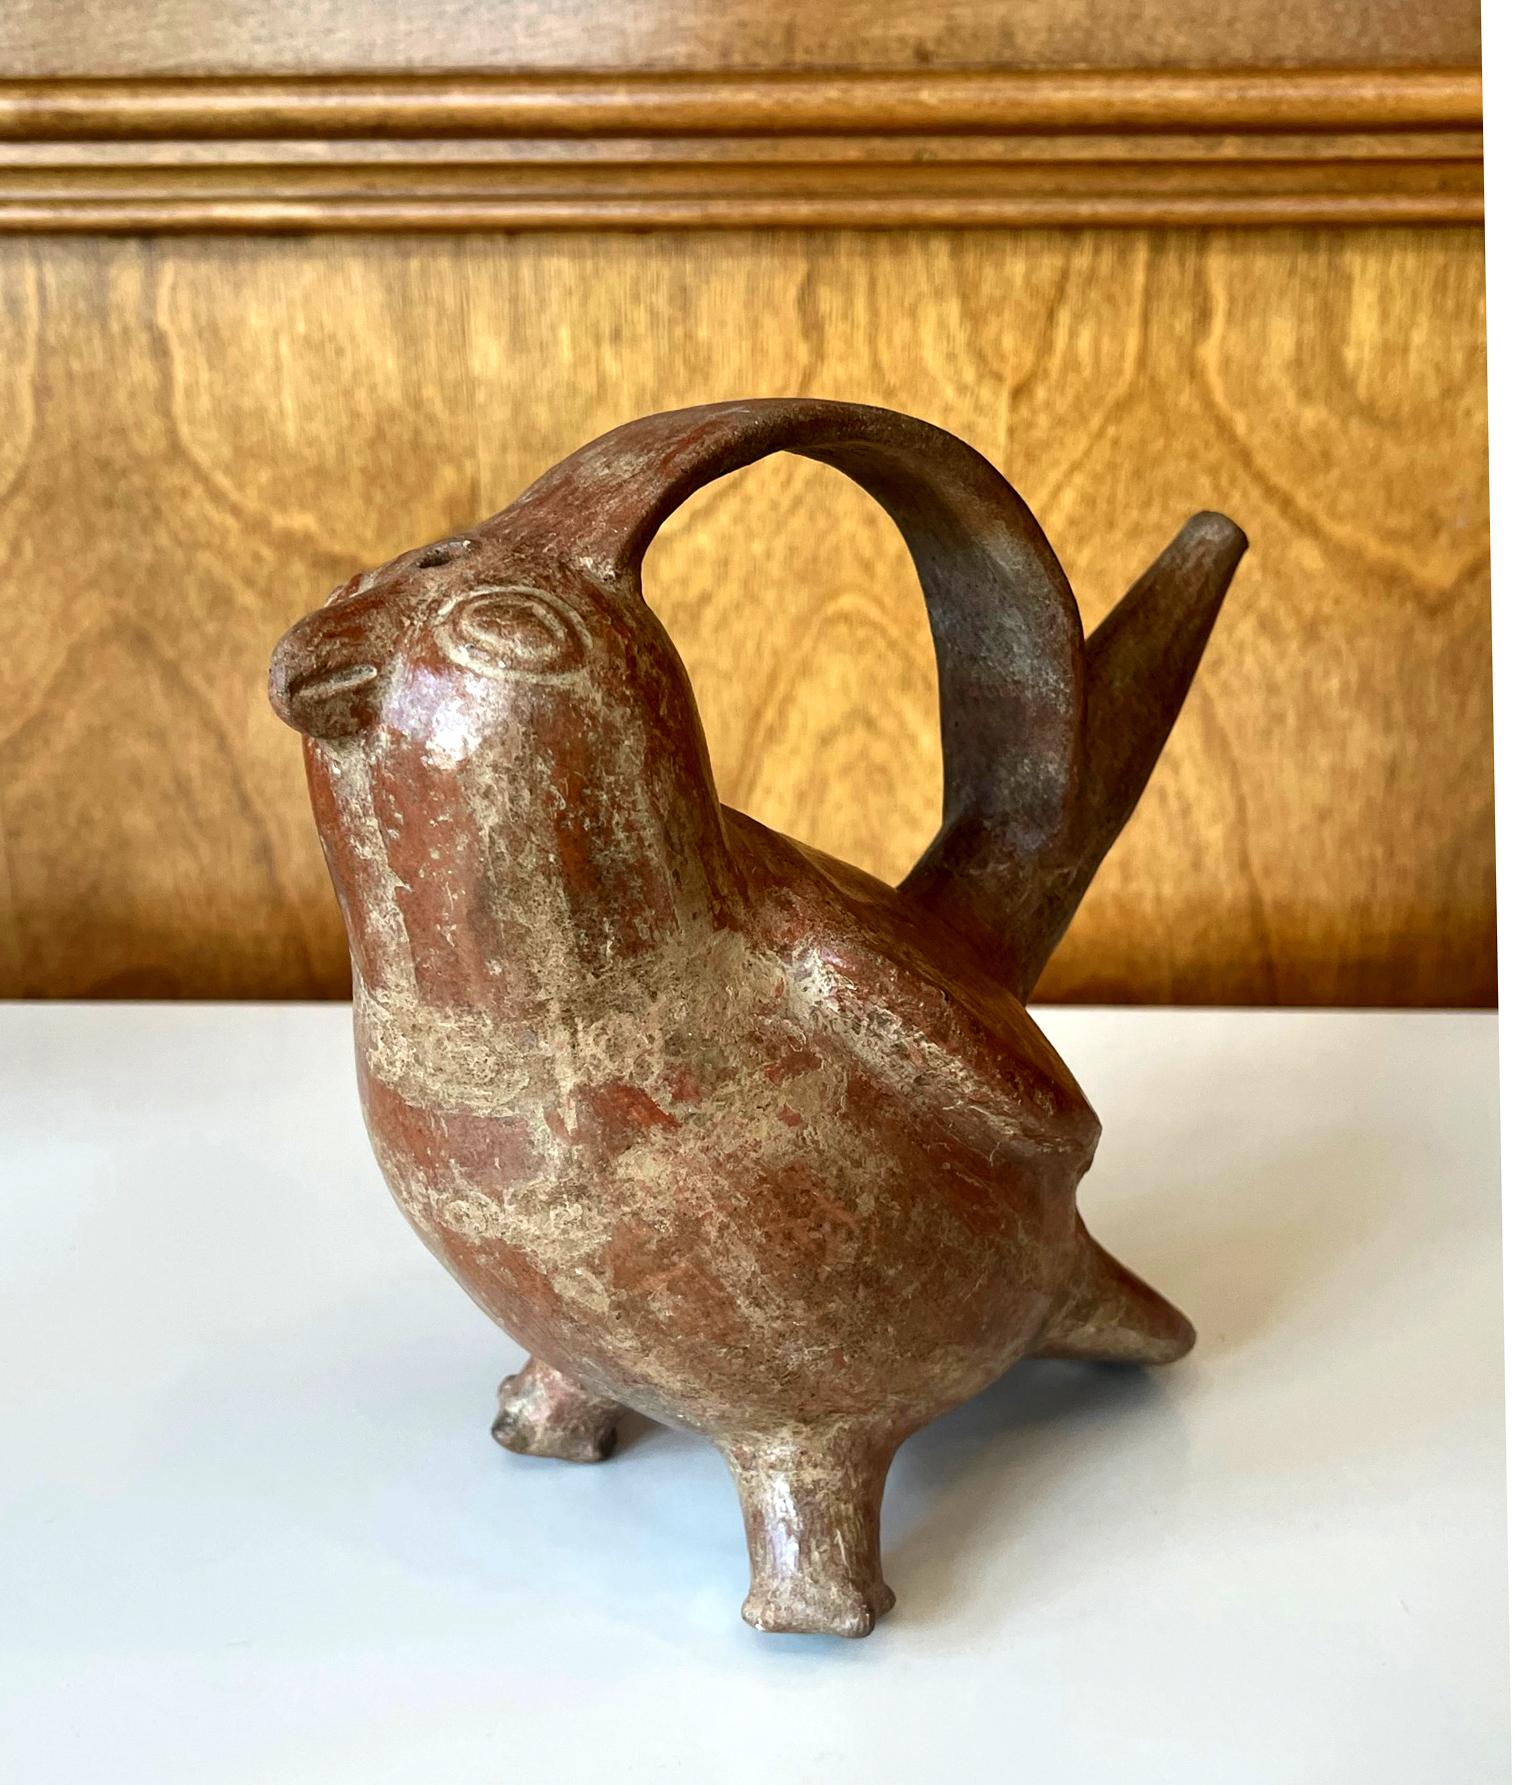 A pre-Columbian ceramic bottle in the shape of a bird from Northern Coast of Peru likely Sican Culture that flourished from 8th to 14th century. The avian vessel features a hollow body with a long sprout on its back that connects the head with an